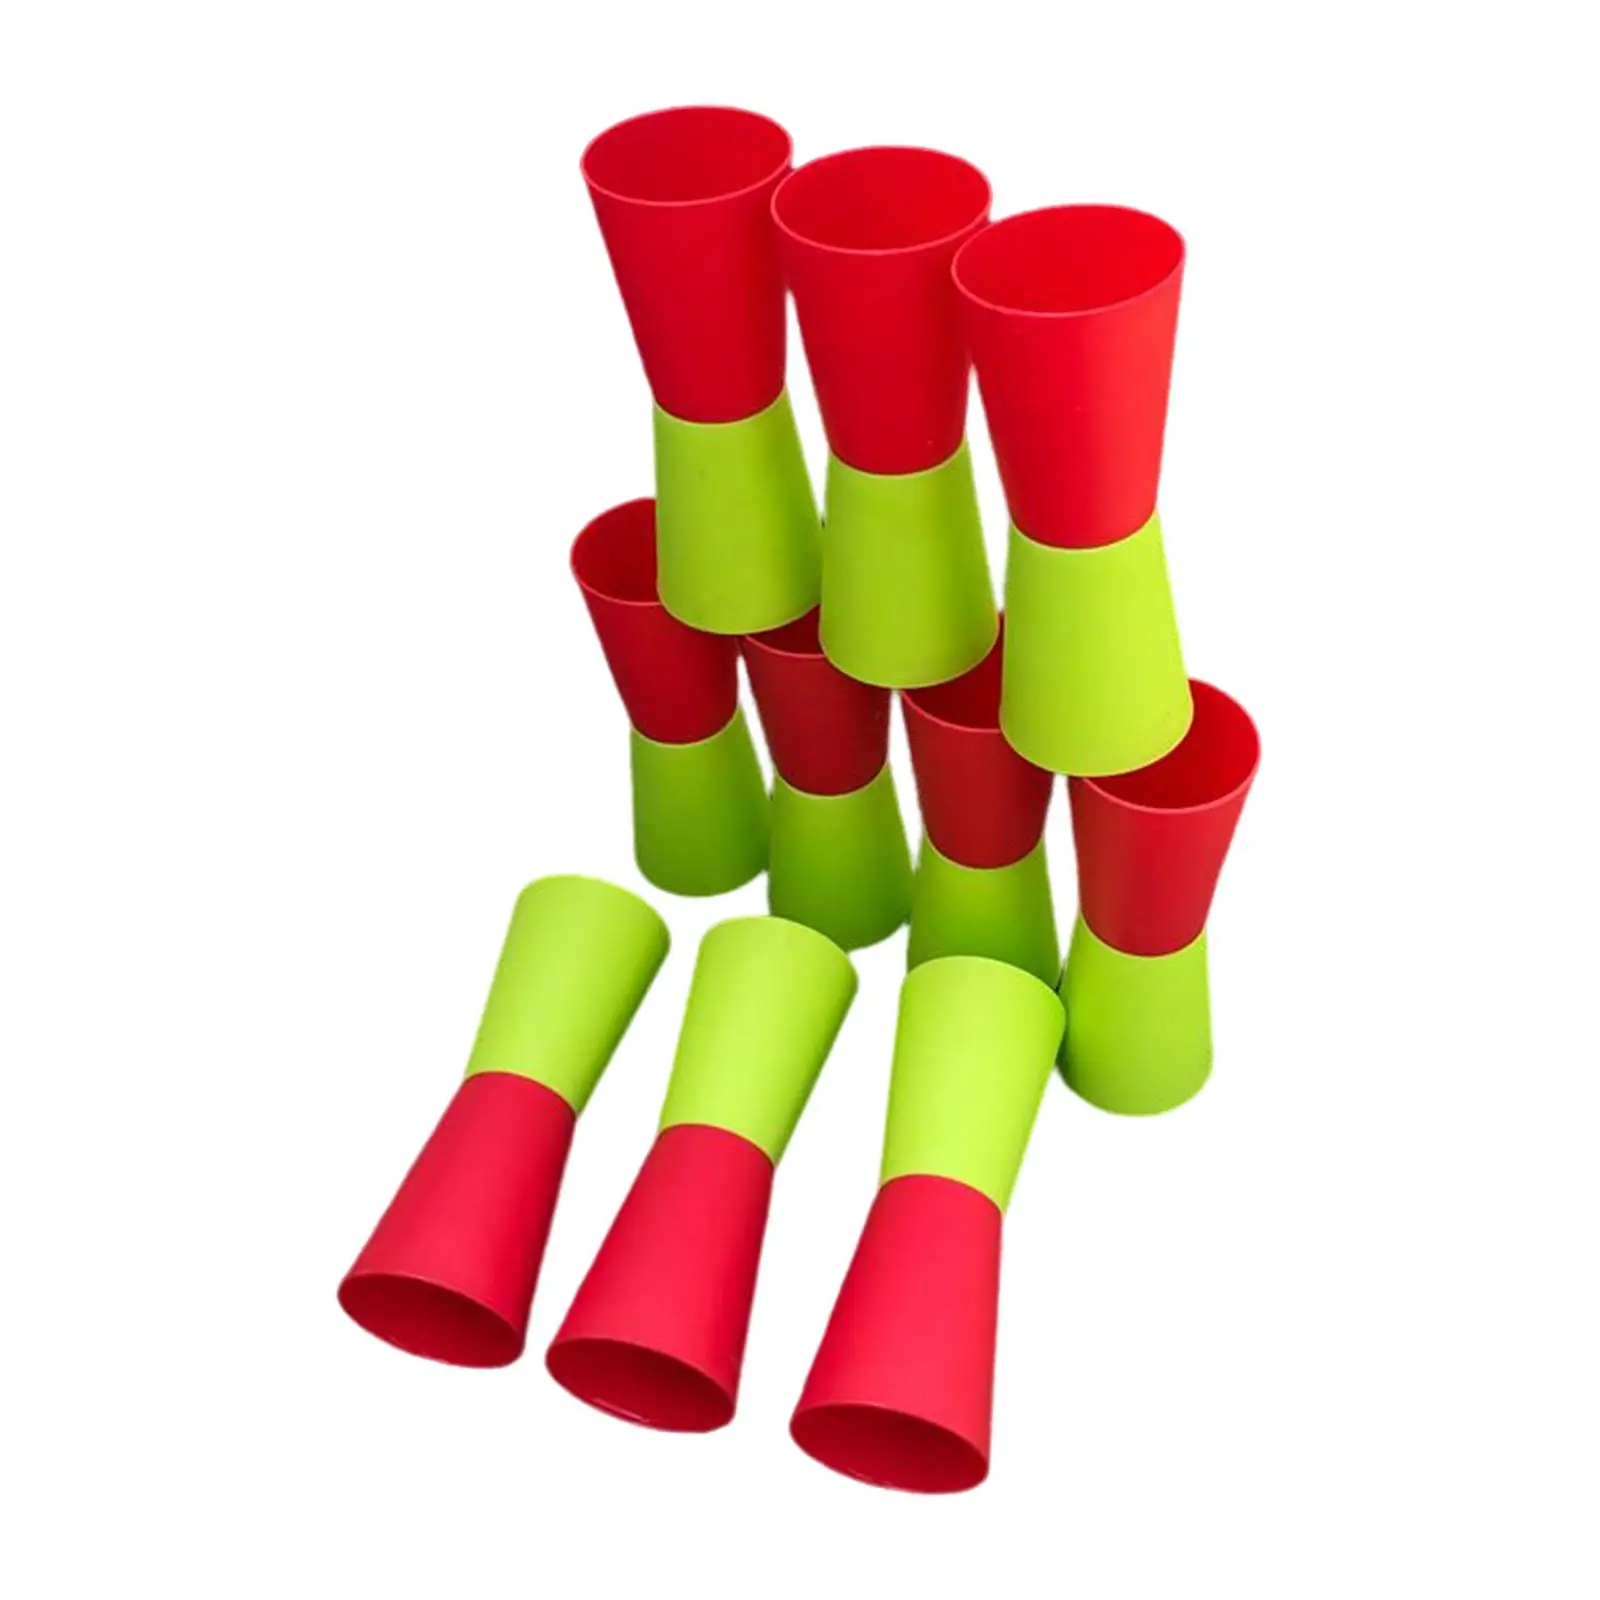 10Pcs Flip Cups Agility Training Workout Body Coordination Sensory Integration Exercise Reversed Cups for Indoor Events